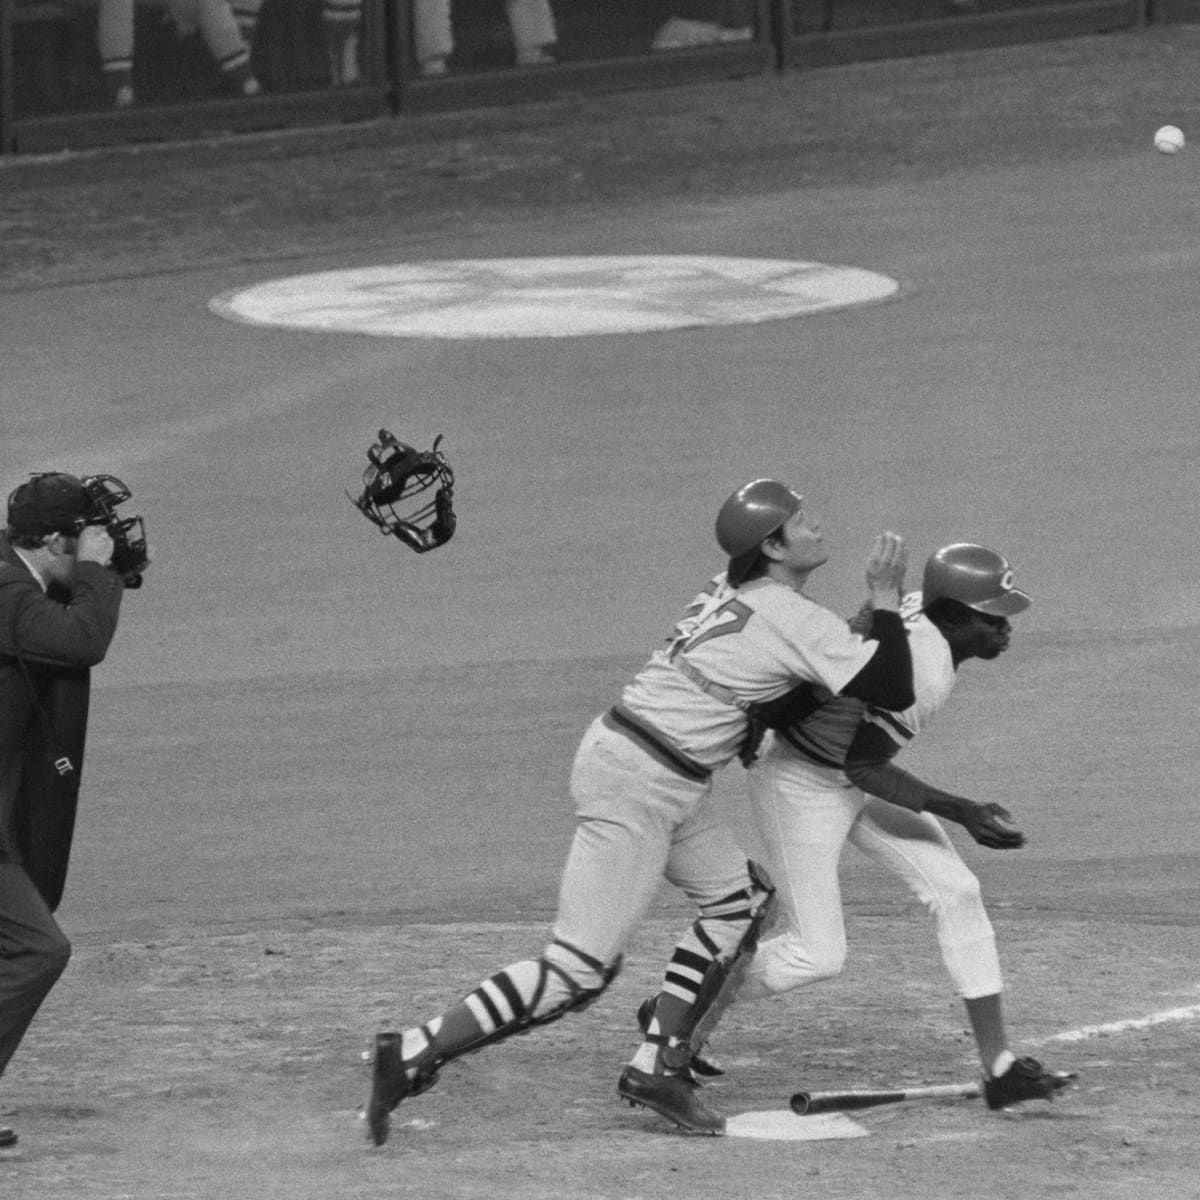 Oakland A's links: NBCS to air several 1970s World Series games